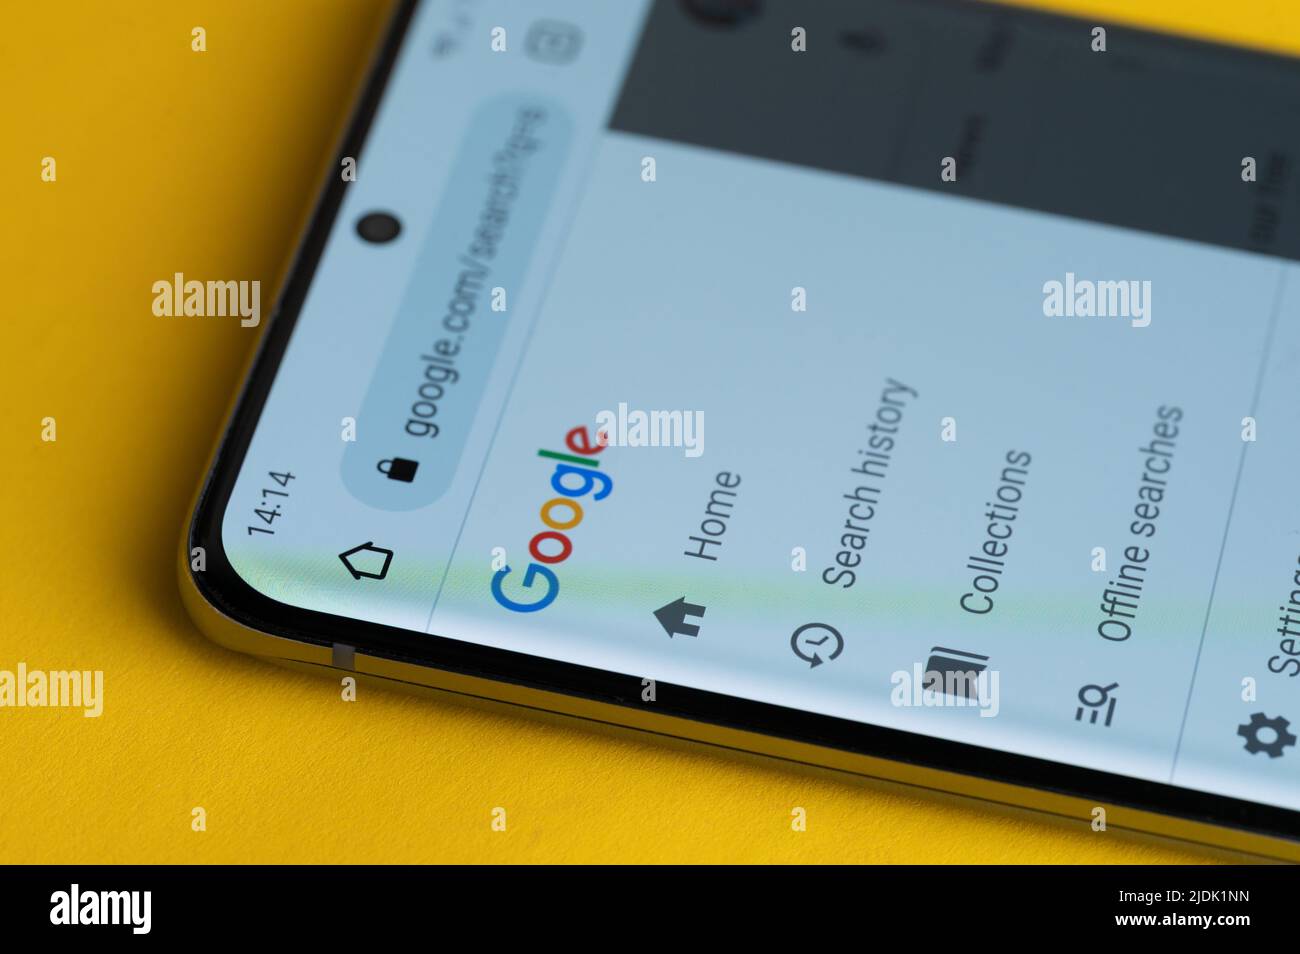 New york, USA - june 21, 2022: Google browser with apps on smartphone screen close up view Stock Photo